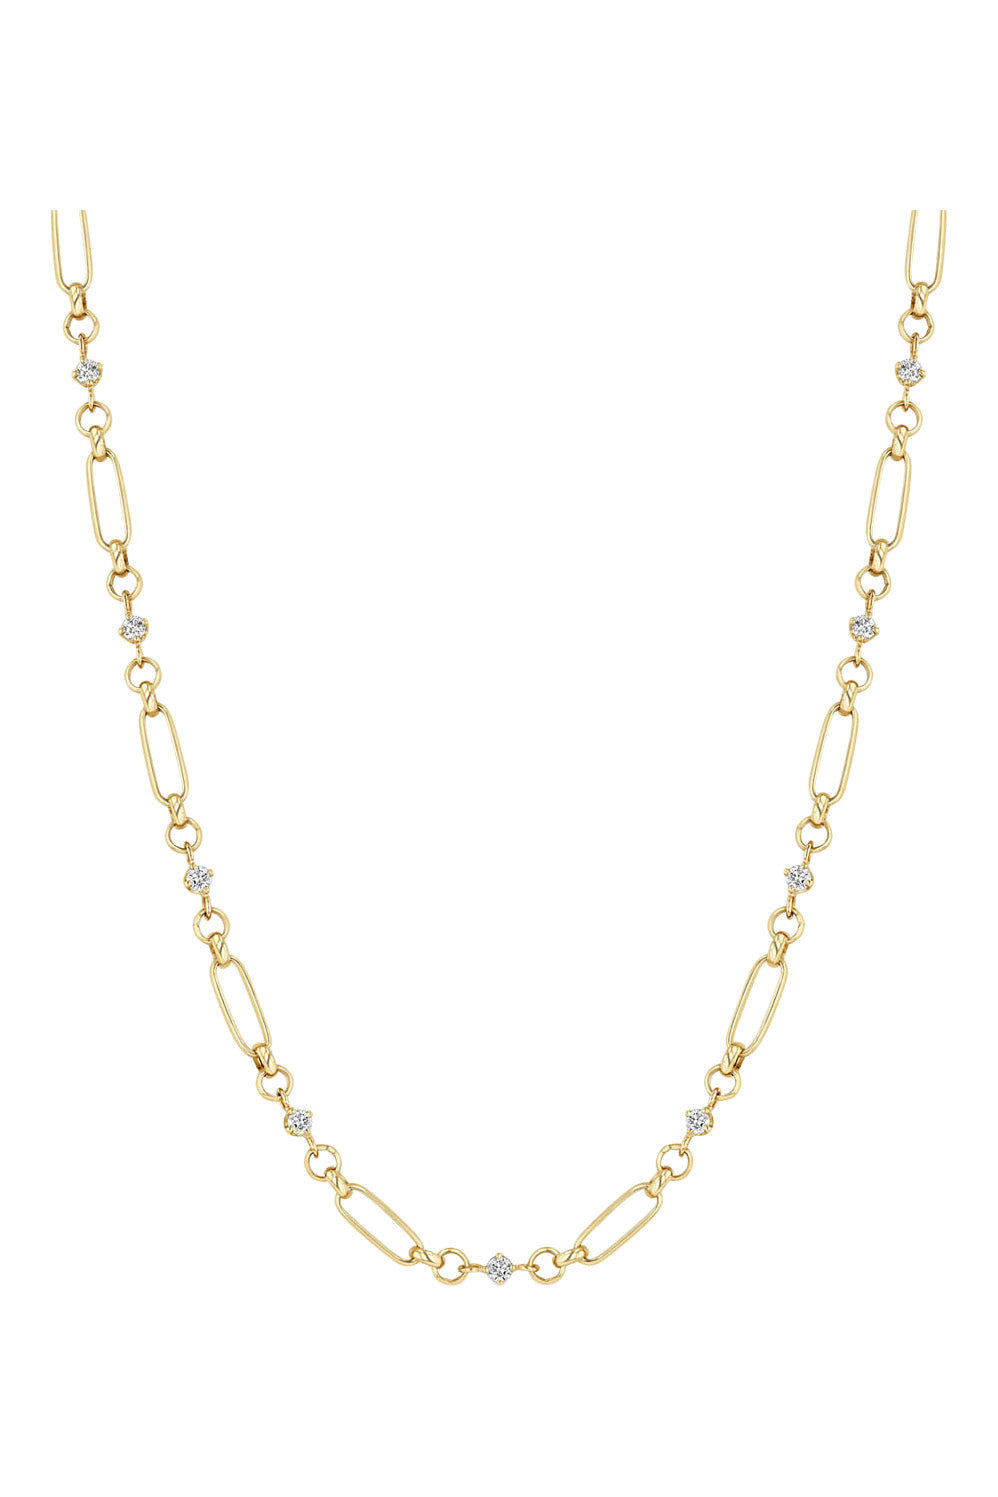 Zoe Chicco Linked Prong Diamond & Medium Paperclip Rolo Chain Necklace in 14k Yellow Gold